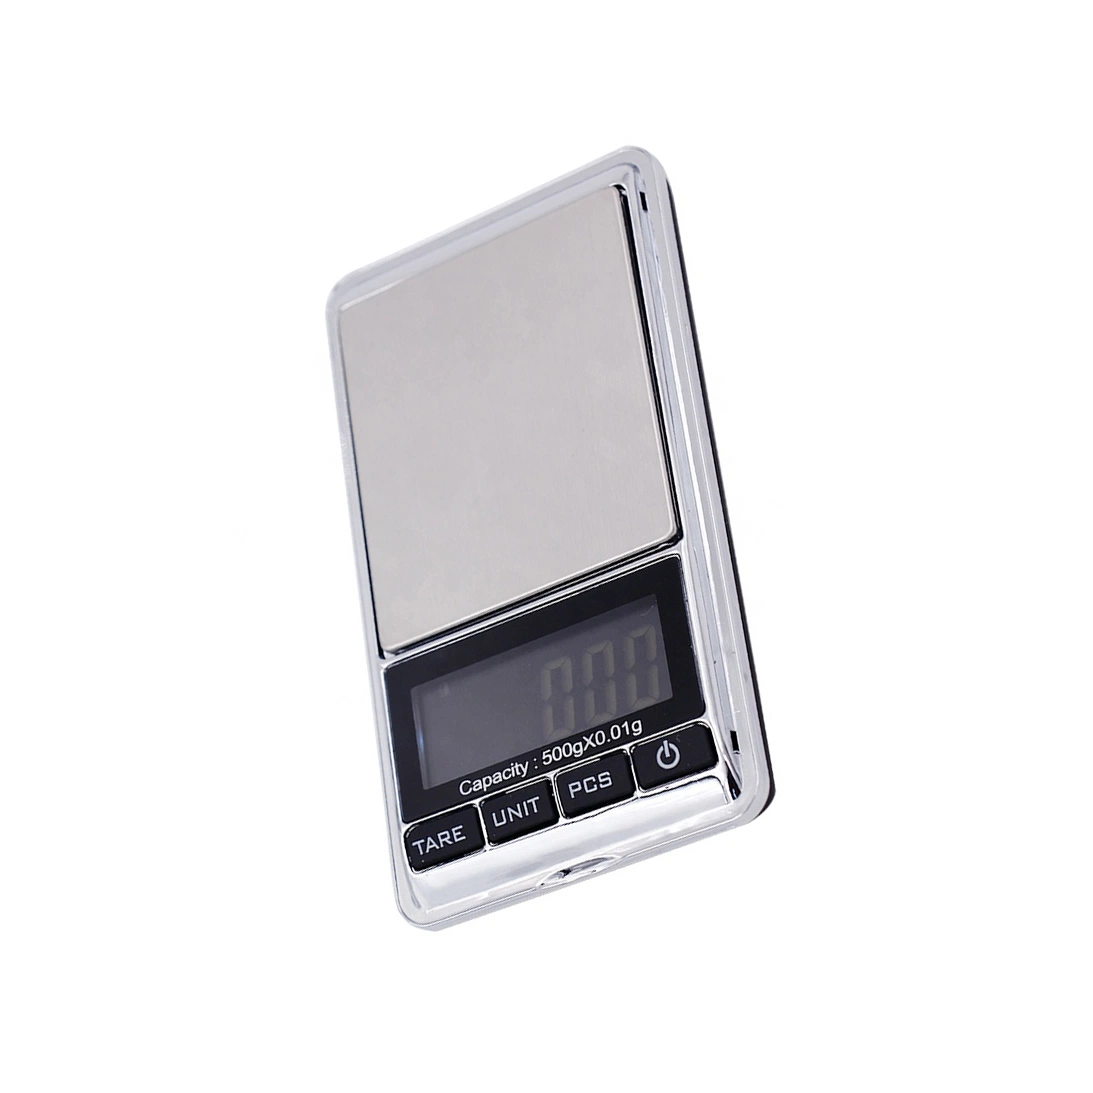 Mini Portable Electronic Balance Digital Pocket Jewelry Weighing Scale